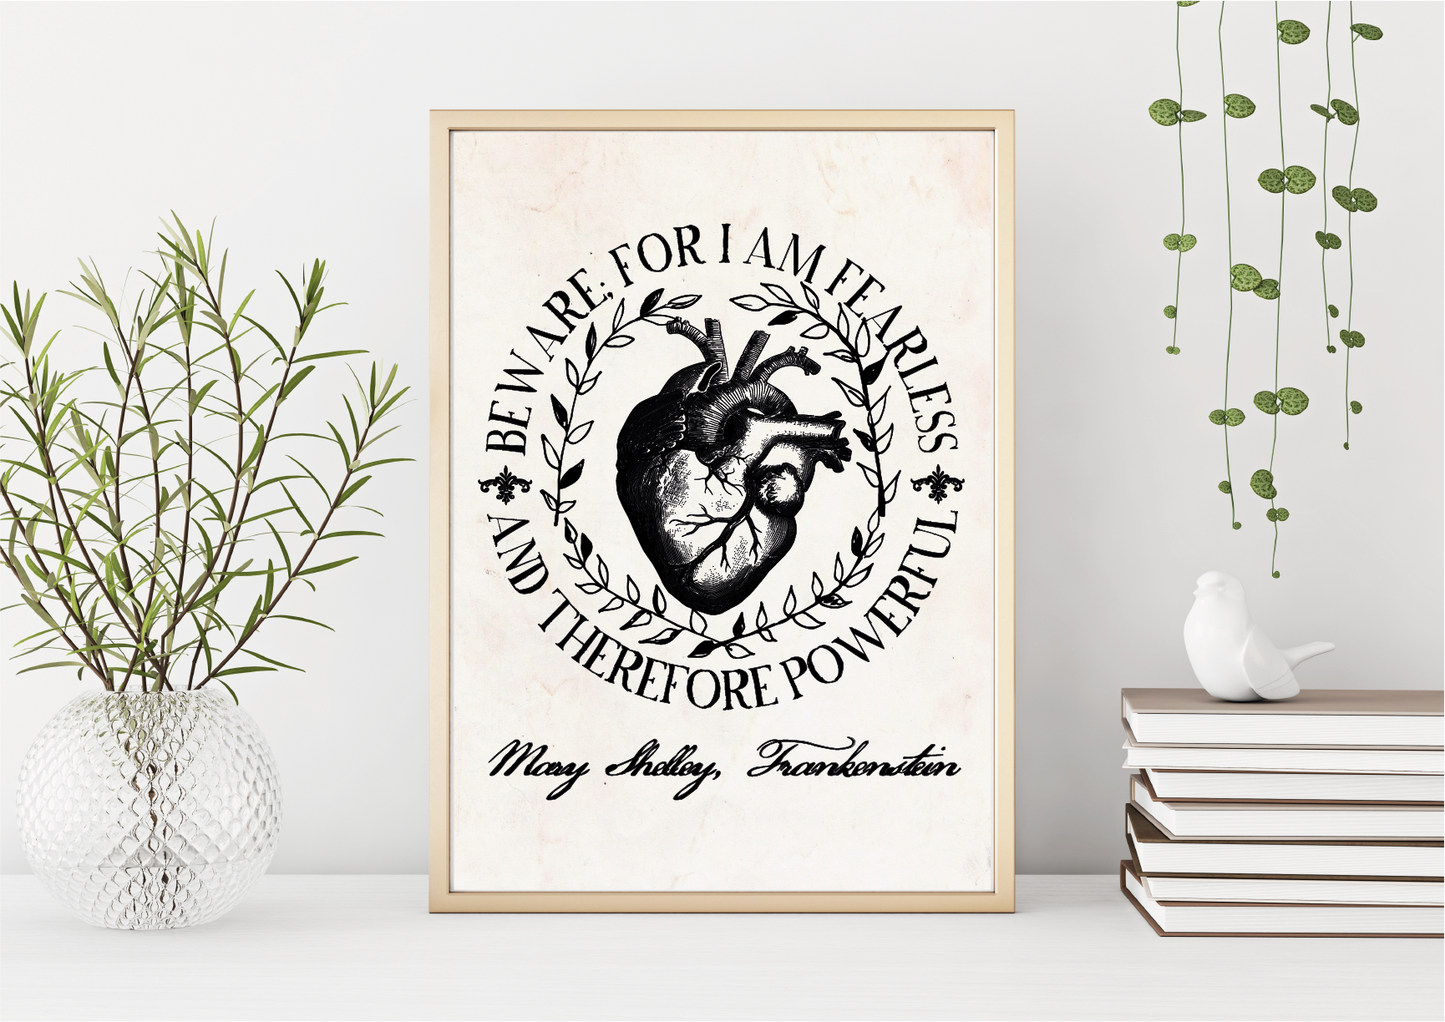 Mary Shelley 'Beware For I Am Fearless, And Therefore Powerful' Art Print